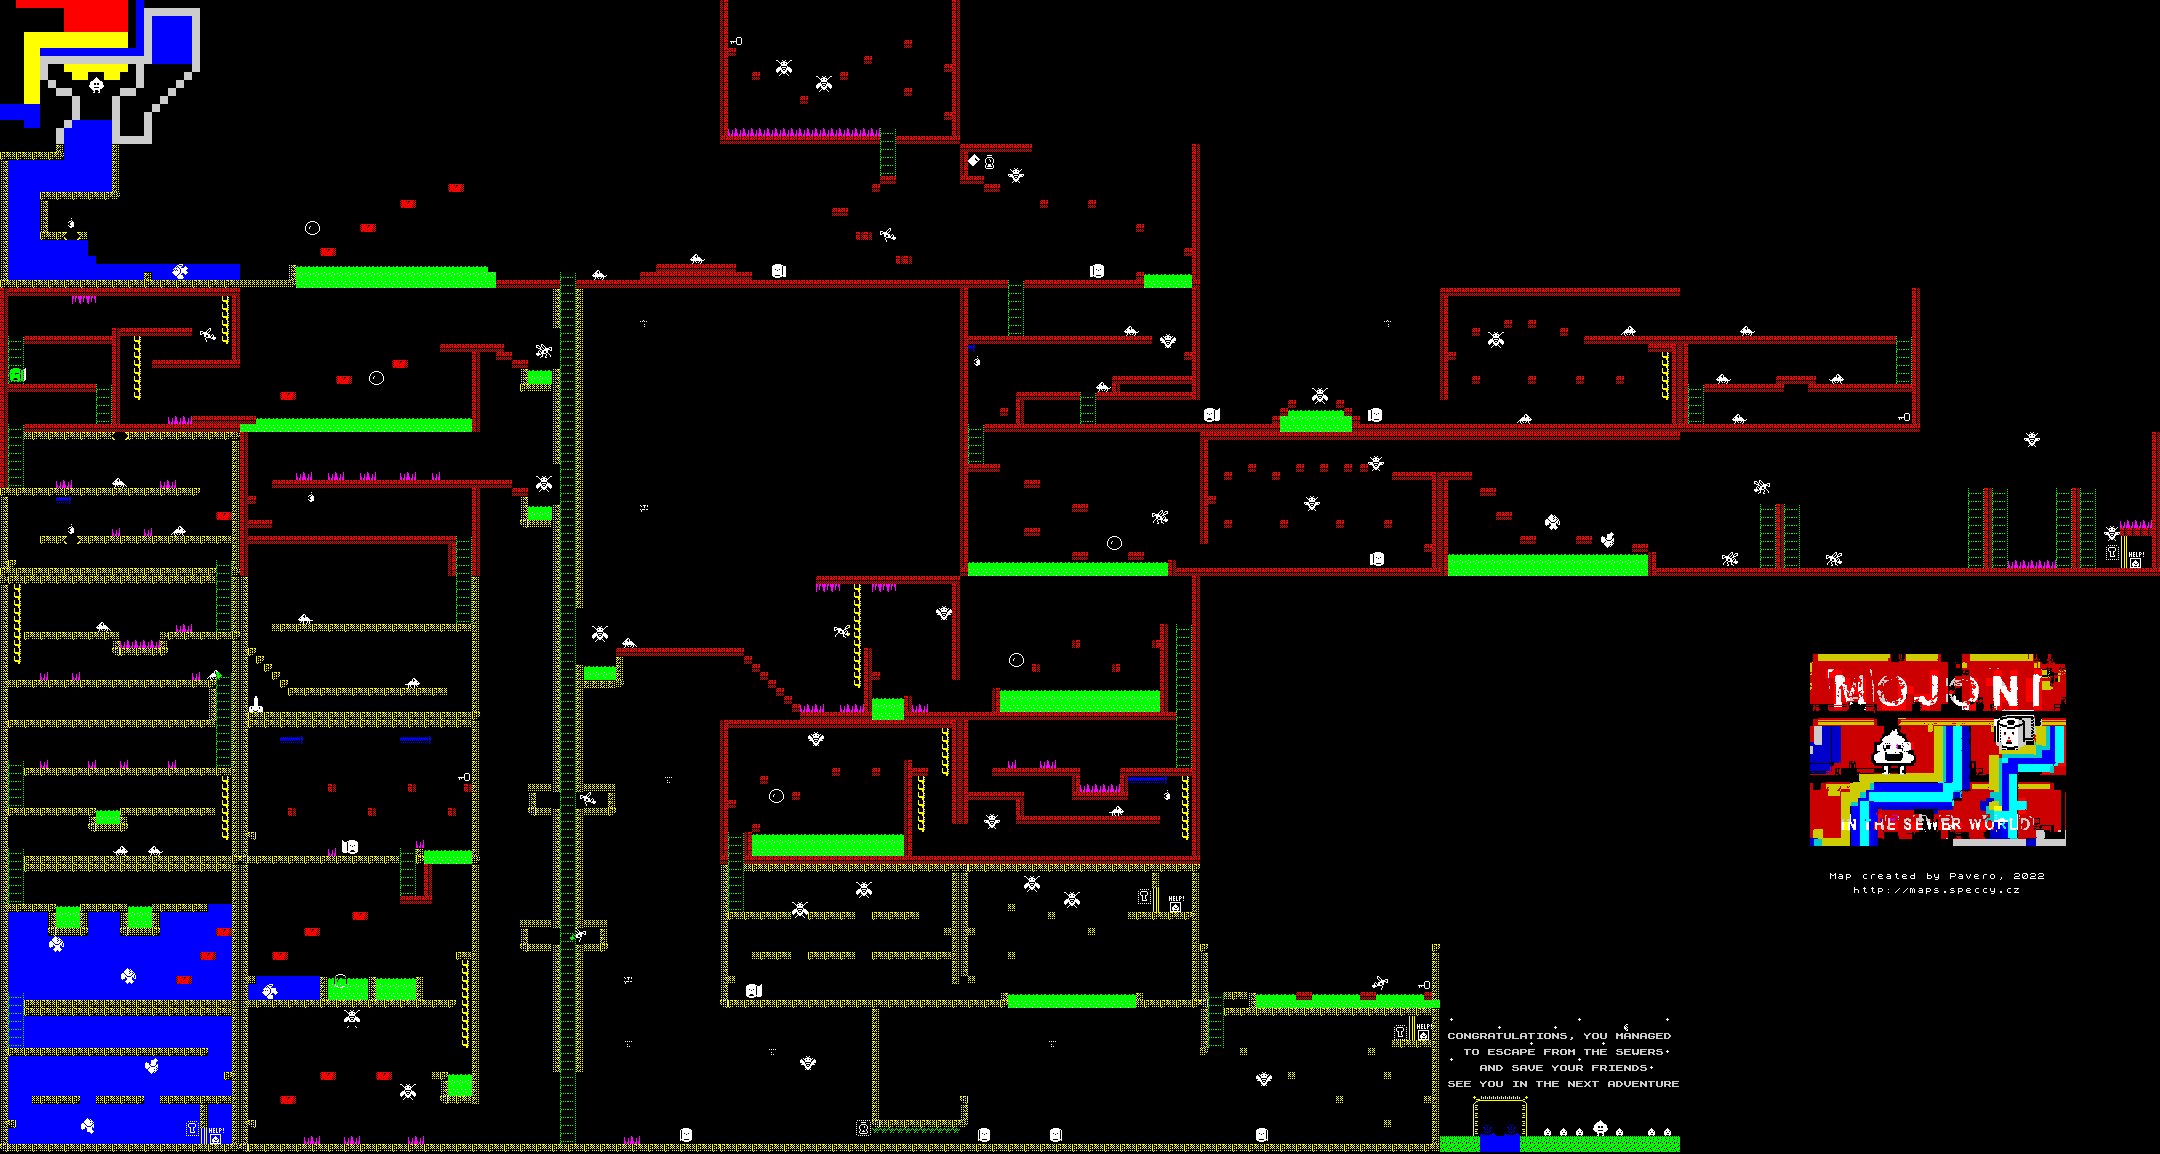 Mojoni in the Sewer World - The Map